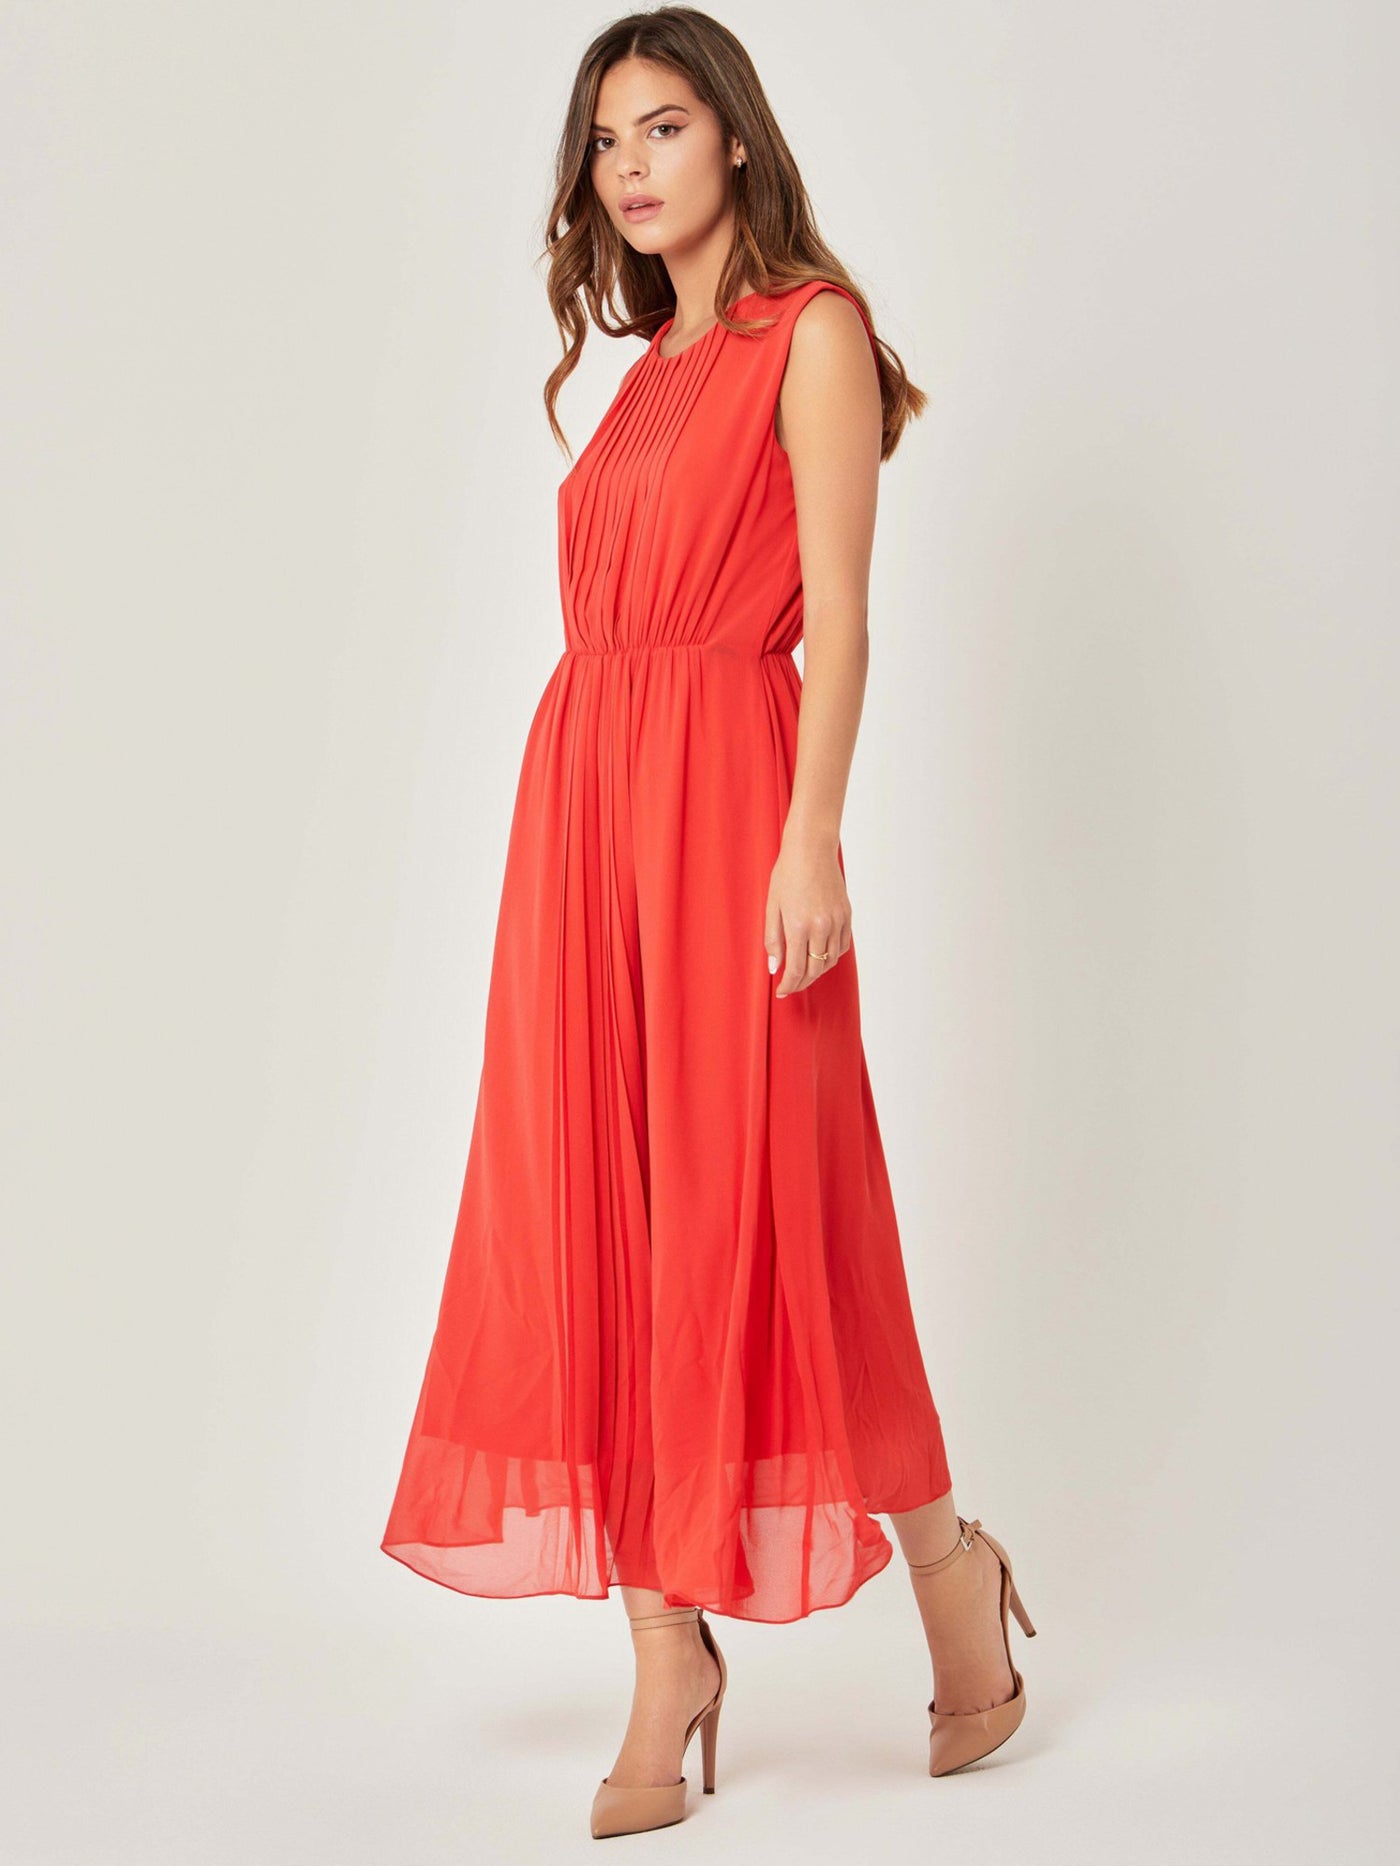 Dress - Maxi Length - Front Pleated